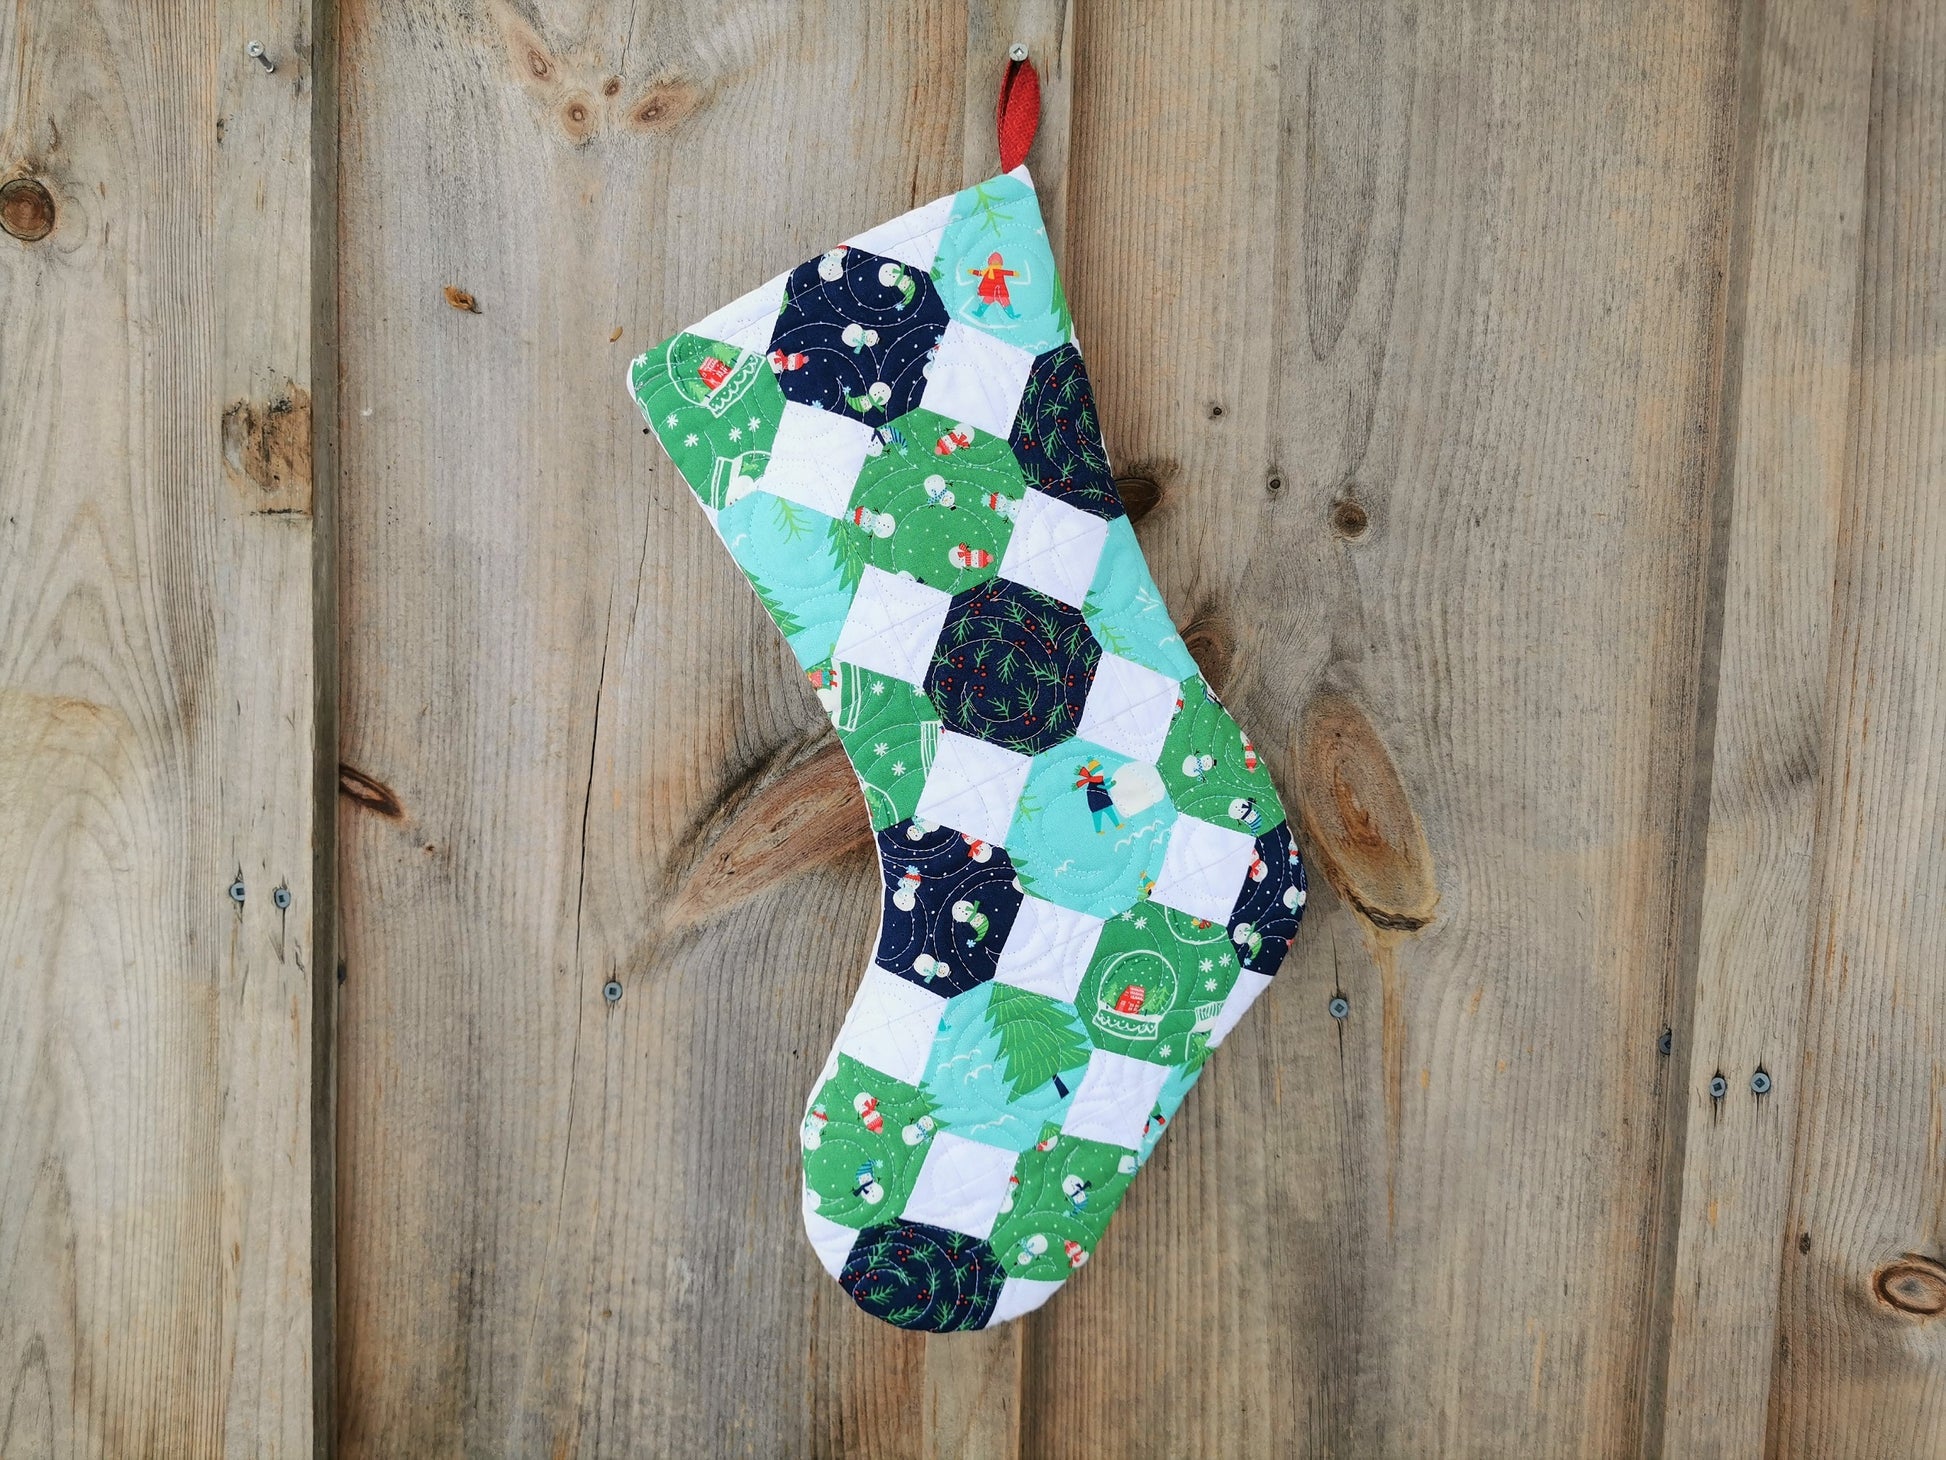 This quilted stocking is pieced with winter themed fabrics in navy, green, and light teal. The fabrics designs have snowmen, pine trees, snow globe, snowflakes, pine branches and berries. 